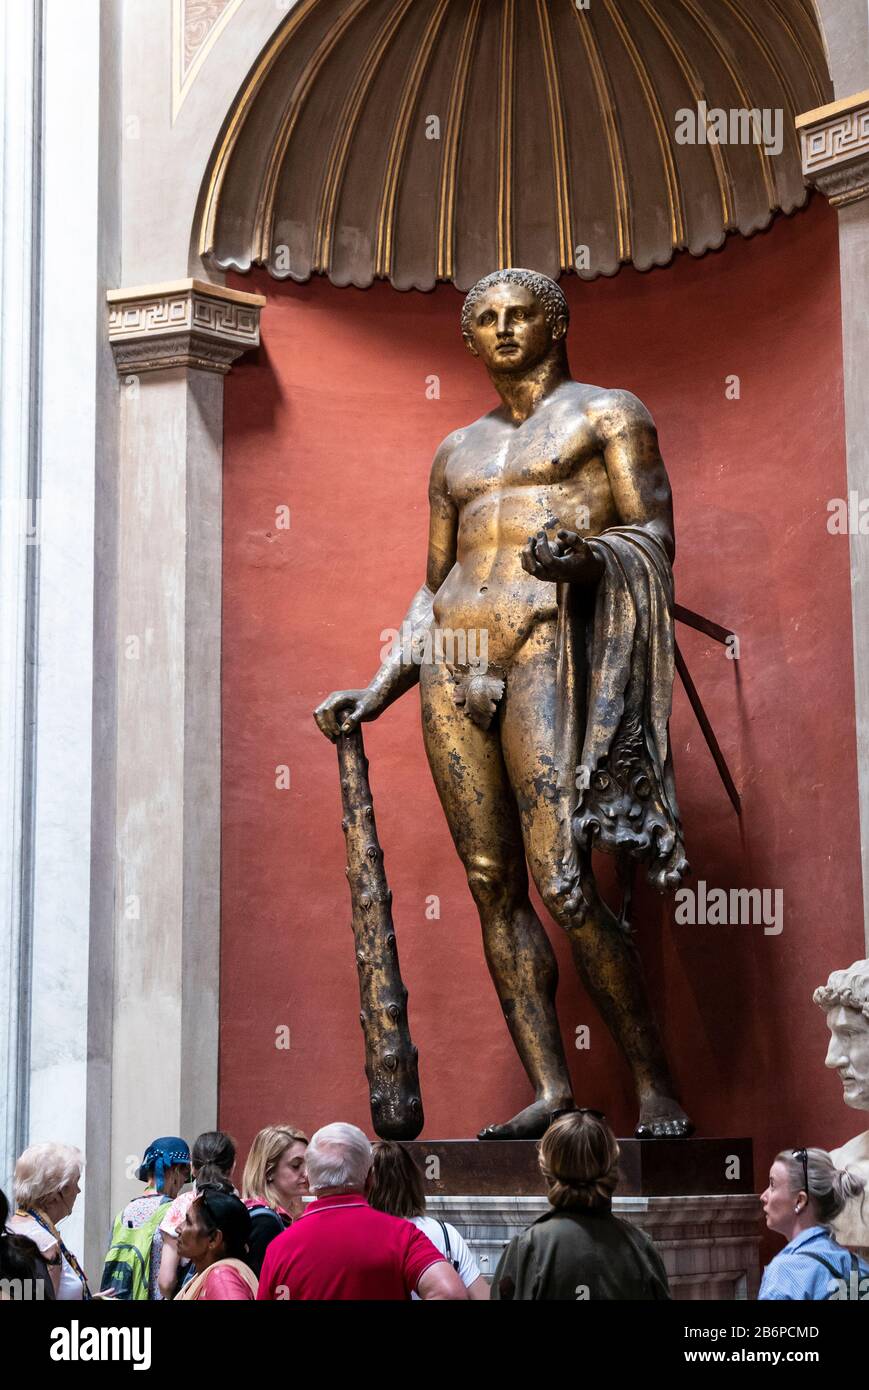 Hercules, Greek Heracles, one of the most famous Greco-Roman legendary heroes, carrying The Golden Fleece in the Vatican Museum, Rome,Italy Stock Photo